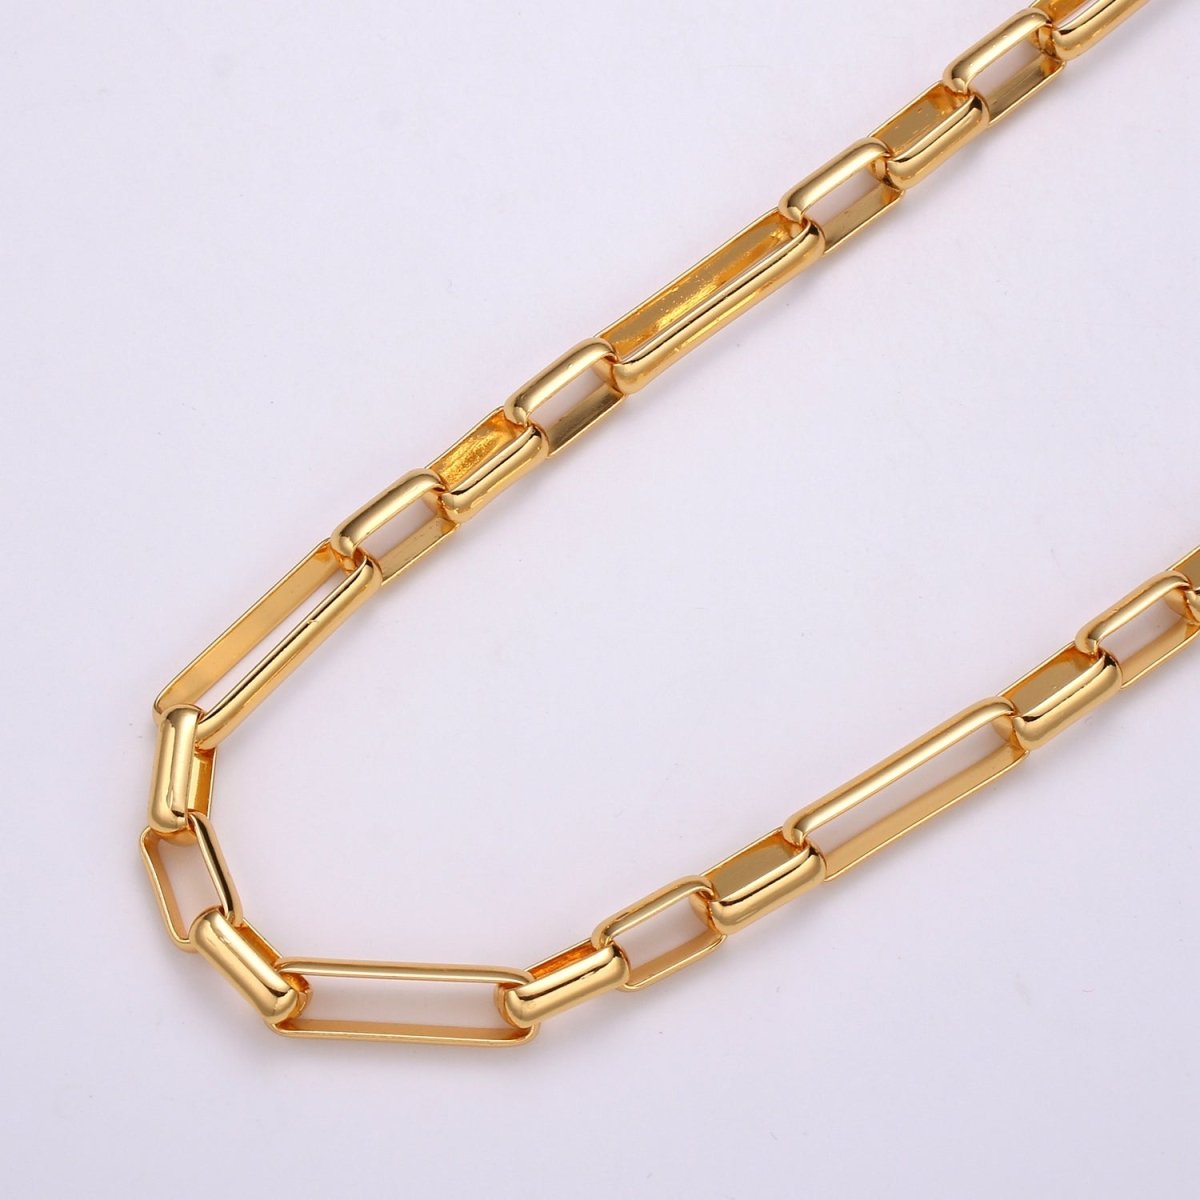 Chunky Chain 24K Gold Filled PAPER CLIP Chain by Yard, Roll Chain For Necklace Bracelet Anklet Jewelry Making | ROLL-421 Clearance Pricing - DLUXCA